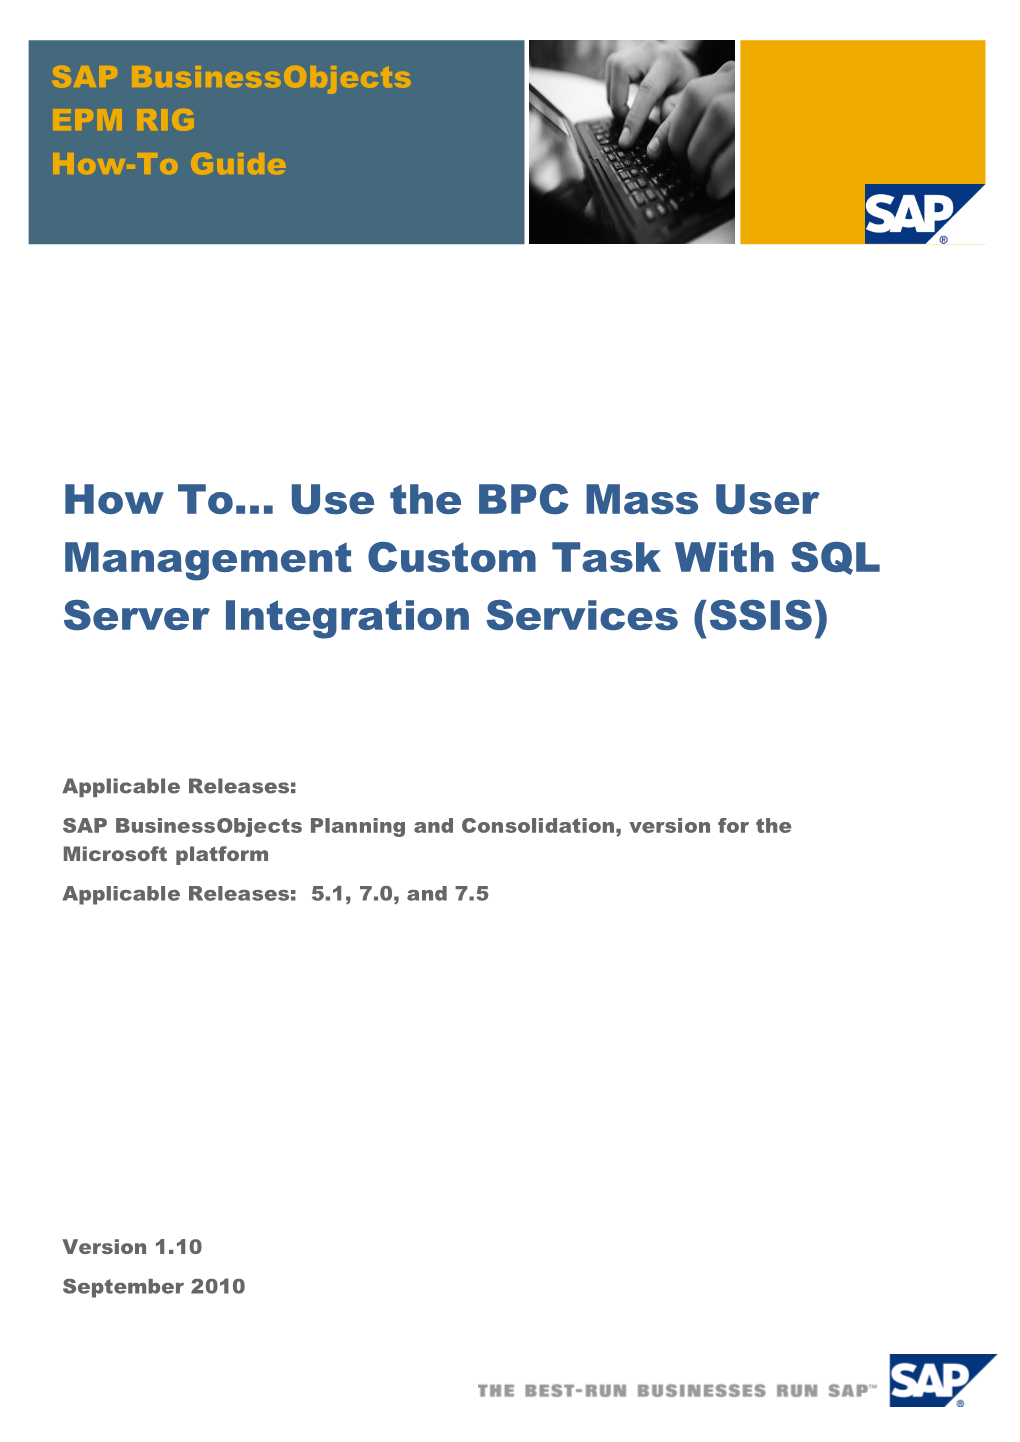 Use the BPC Mass User Management Custom Task with SQL Server Integration Services (SSIS)